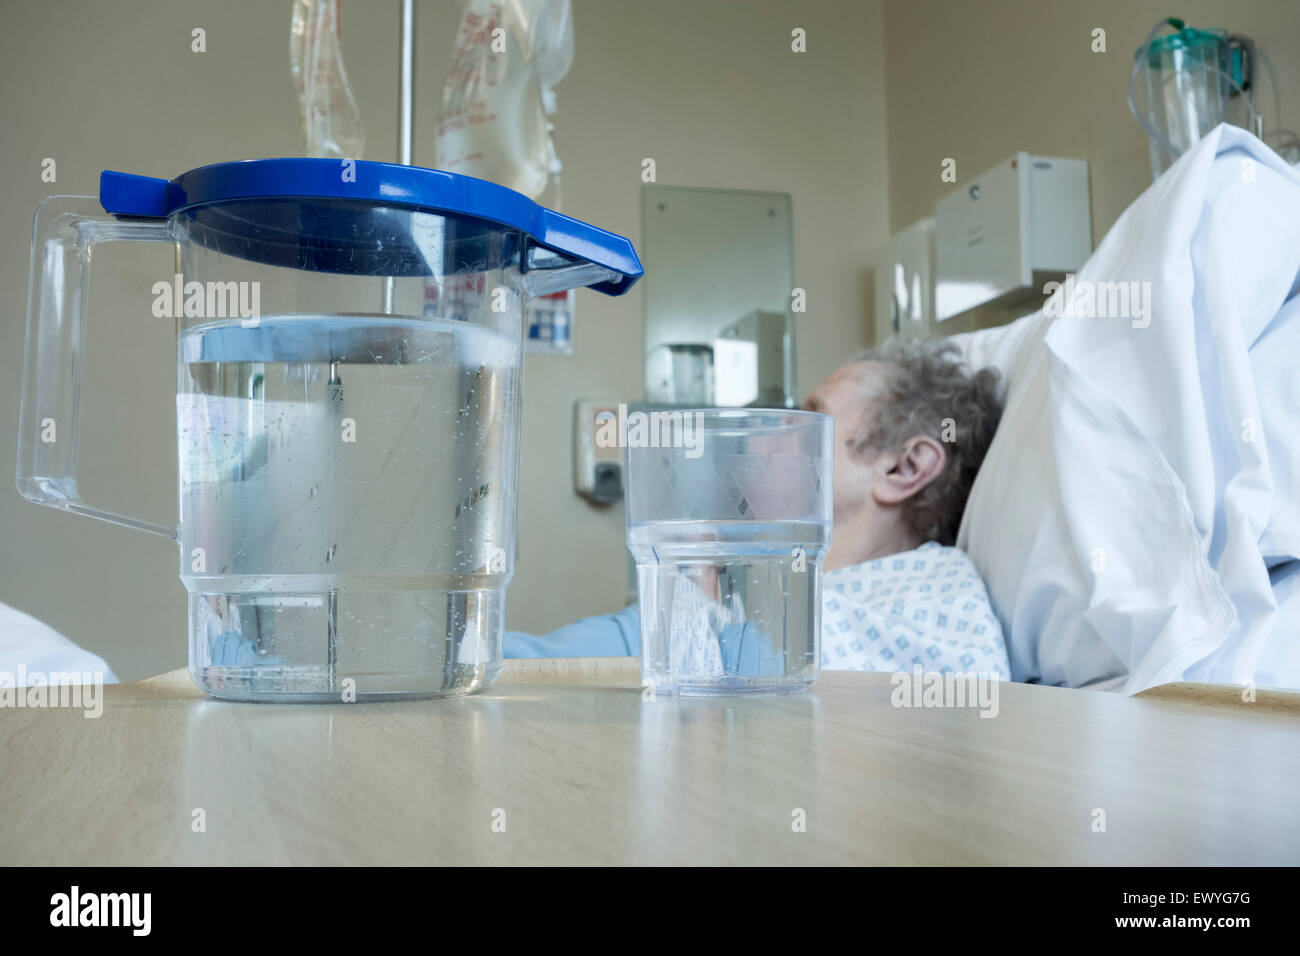 Elderly lady in her nineties in bed on NHS hospital ward with jug of water on bedside table. Stock Photo